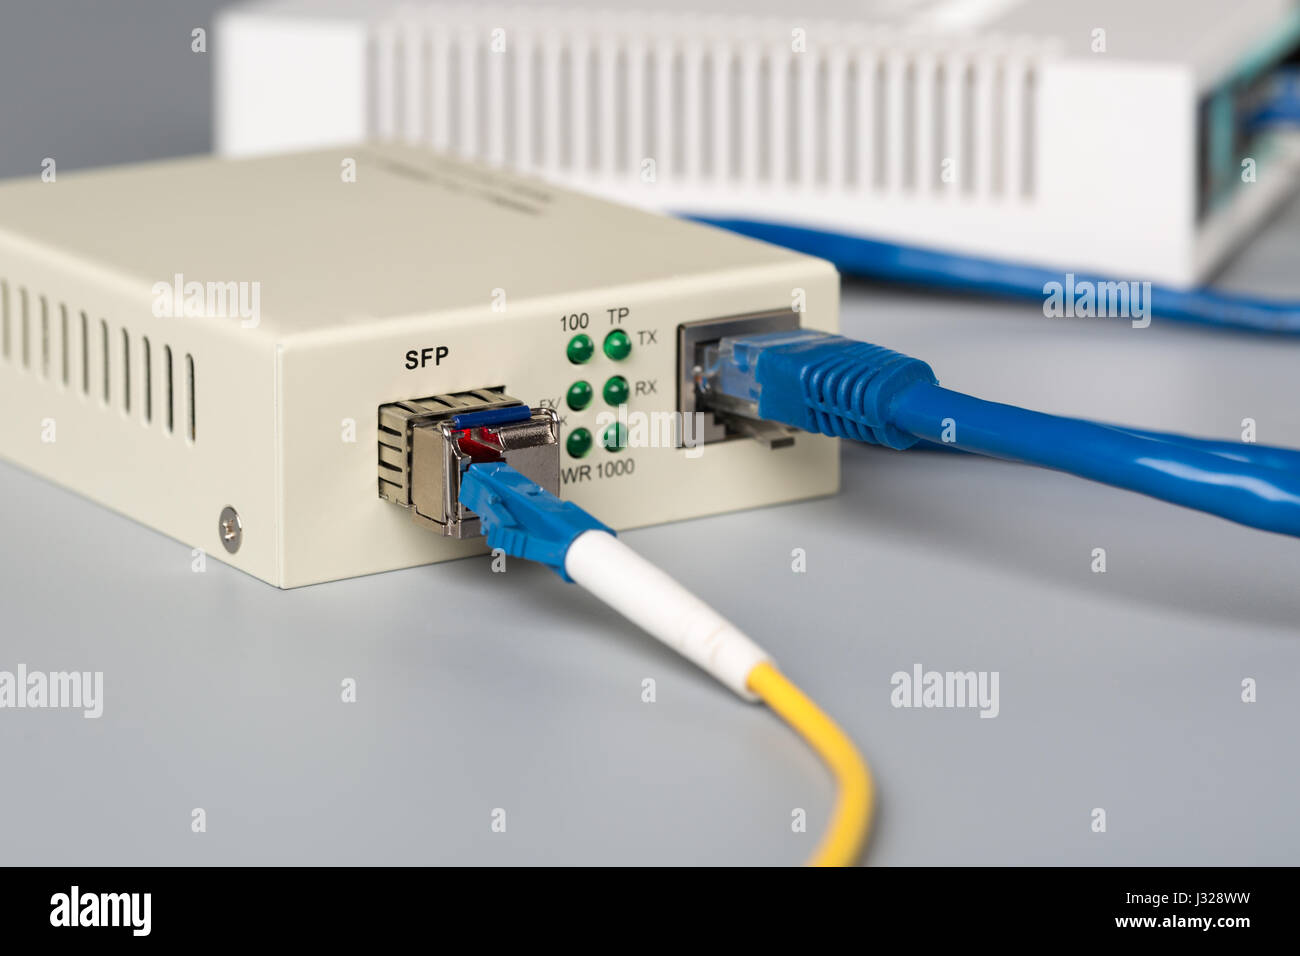 1Gbps optical media converter with SFP module connected to ethernet port  SOHO router Stock Photo - Alamy